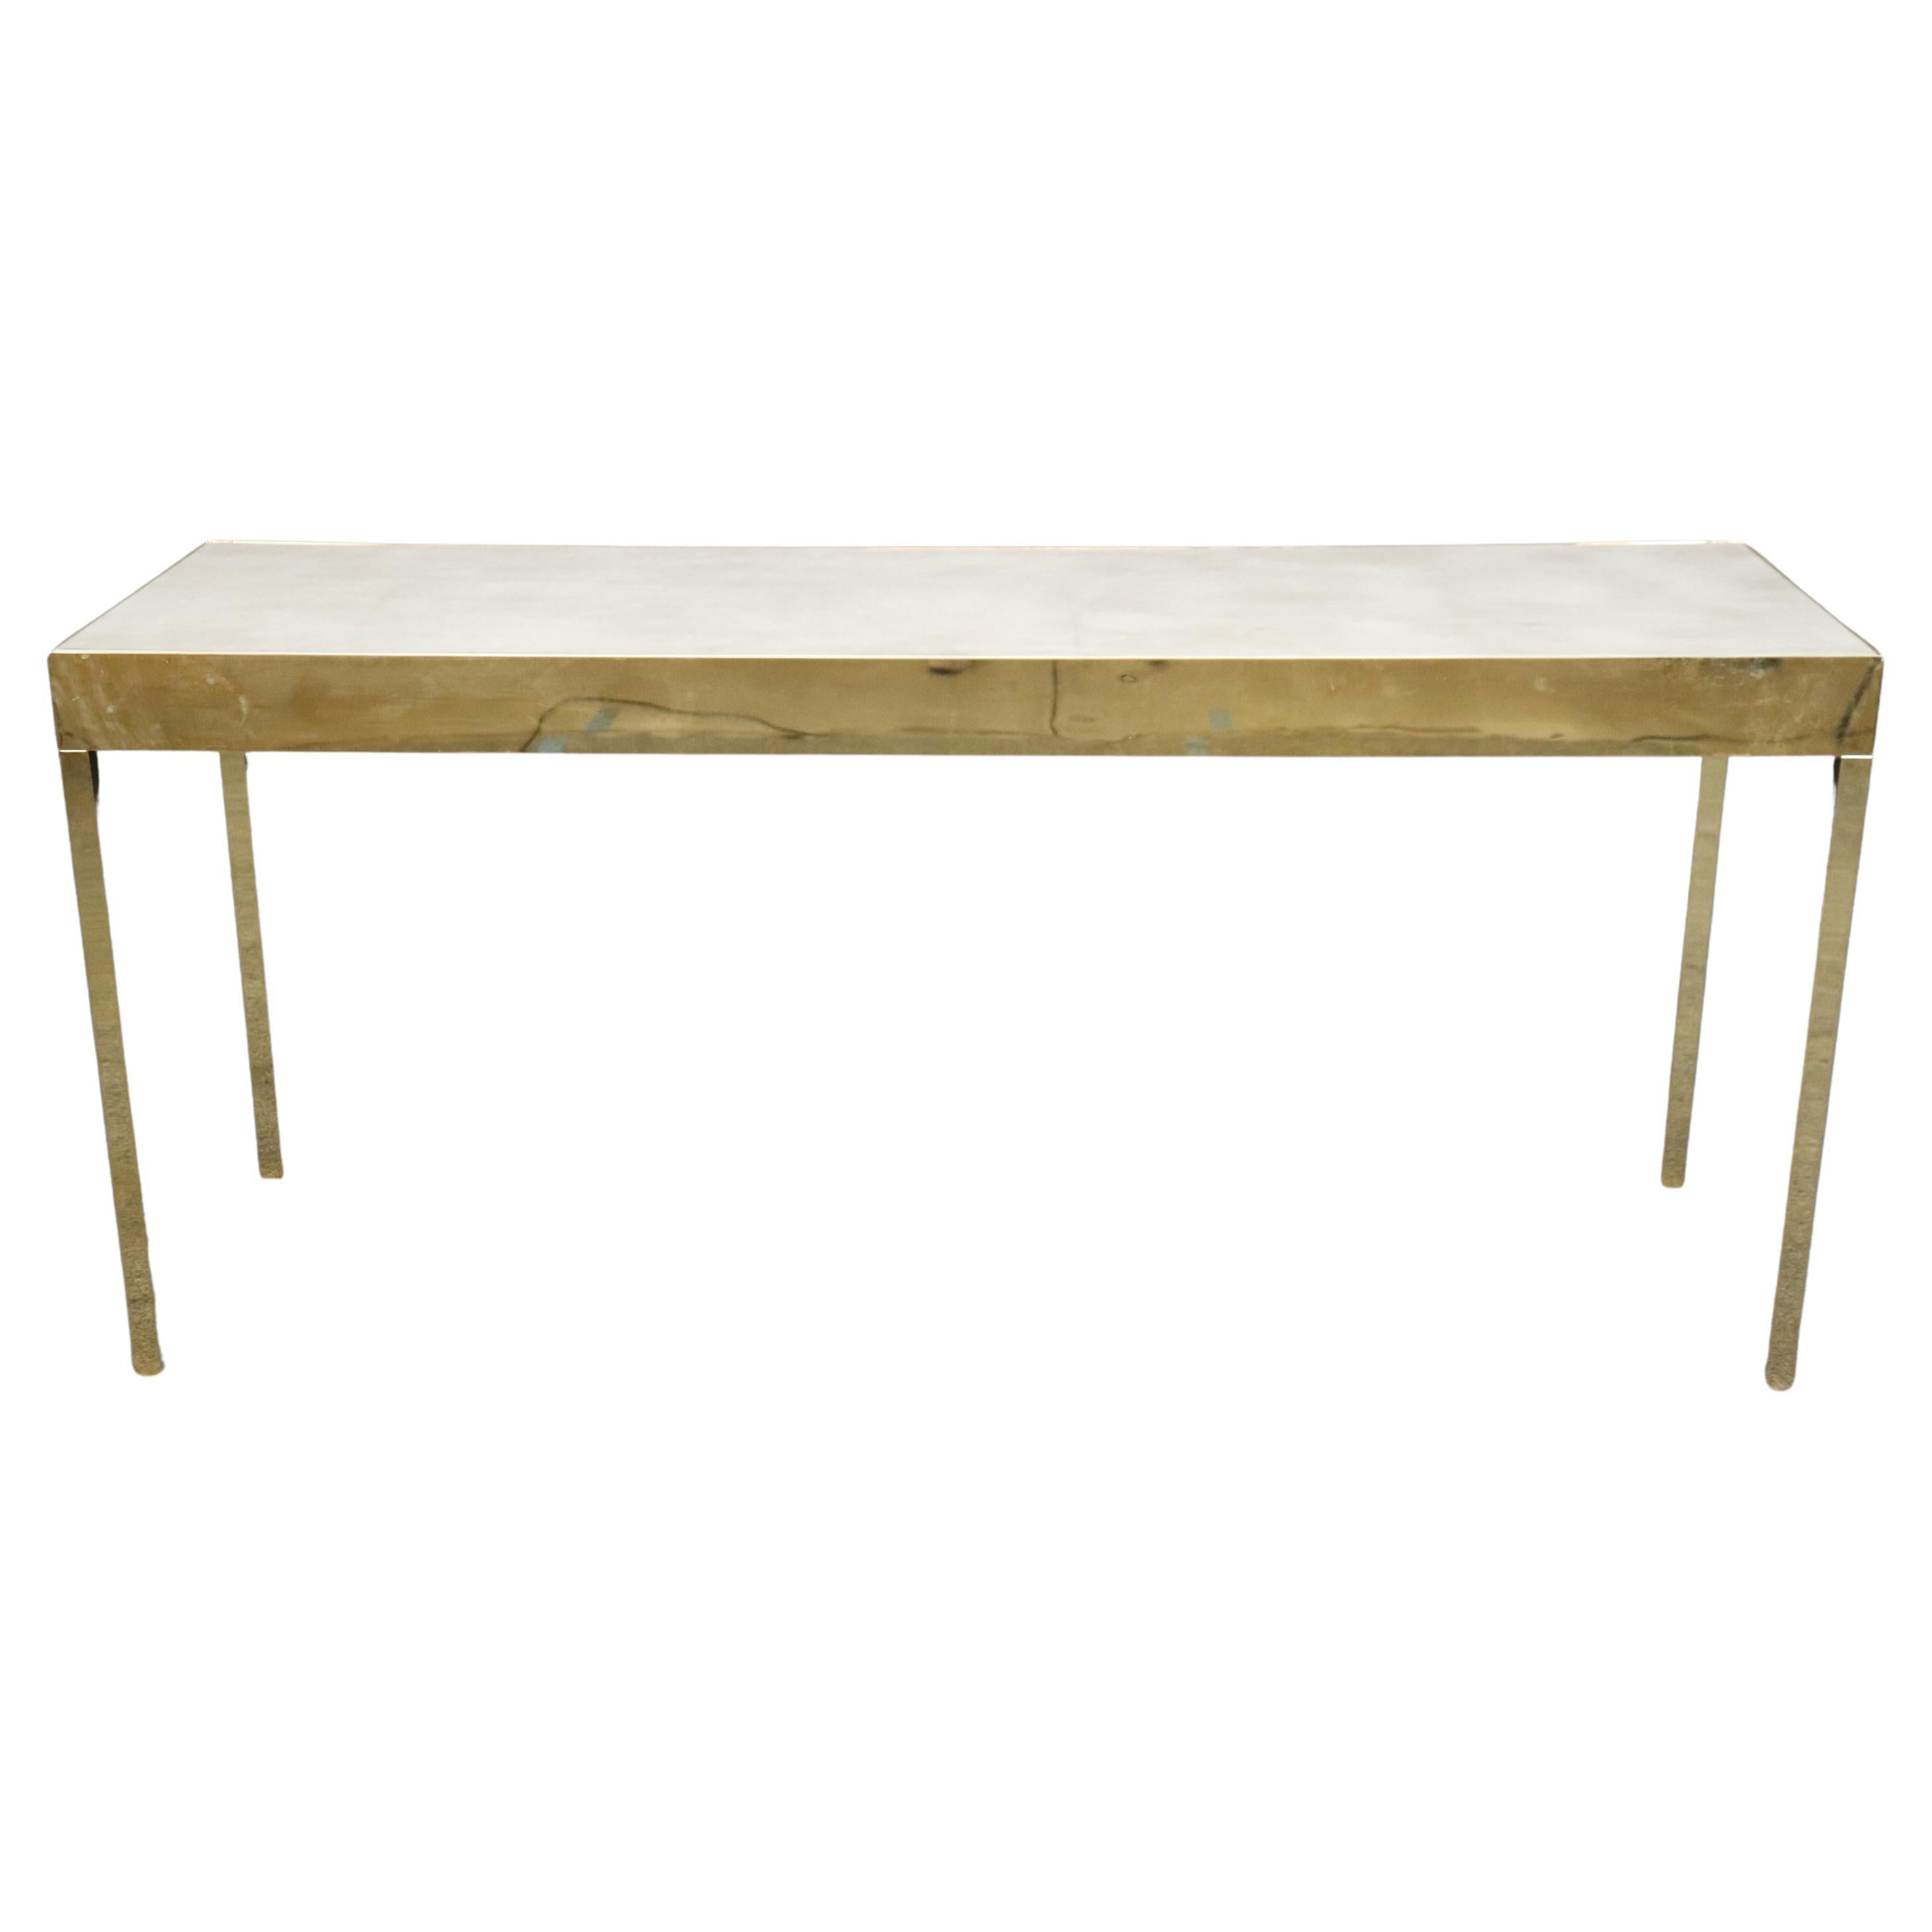 Milo Baughman Style Brass Flashed Faux Leather Console Table 2/2